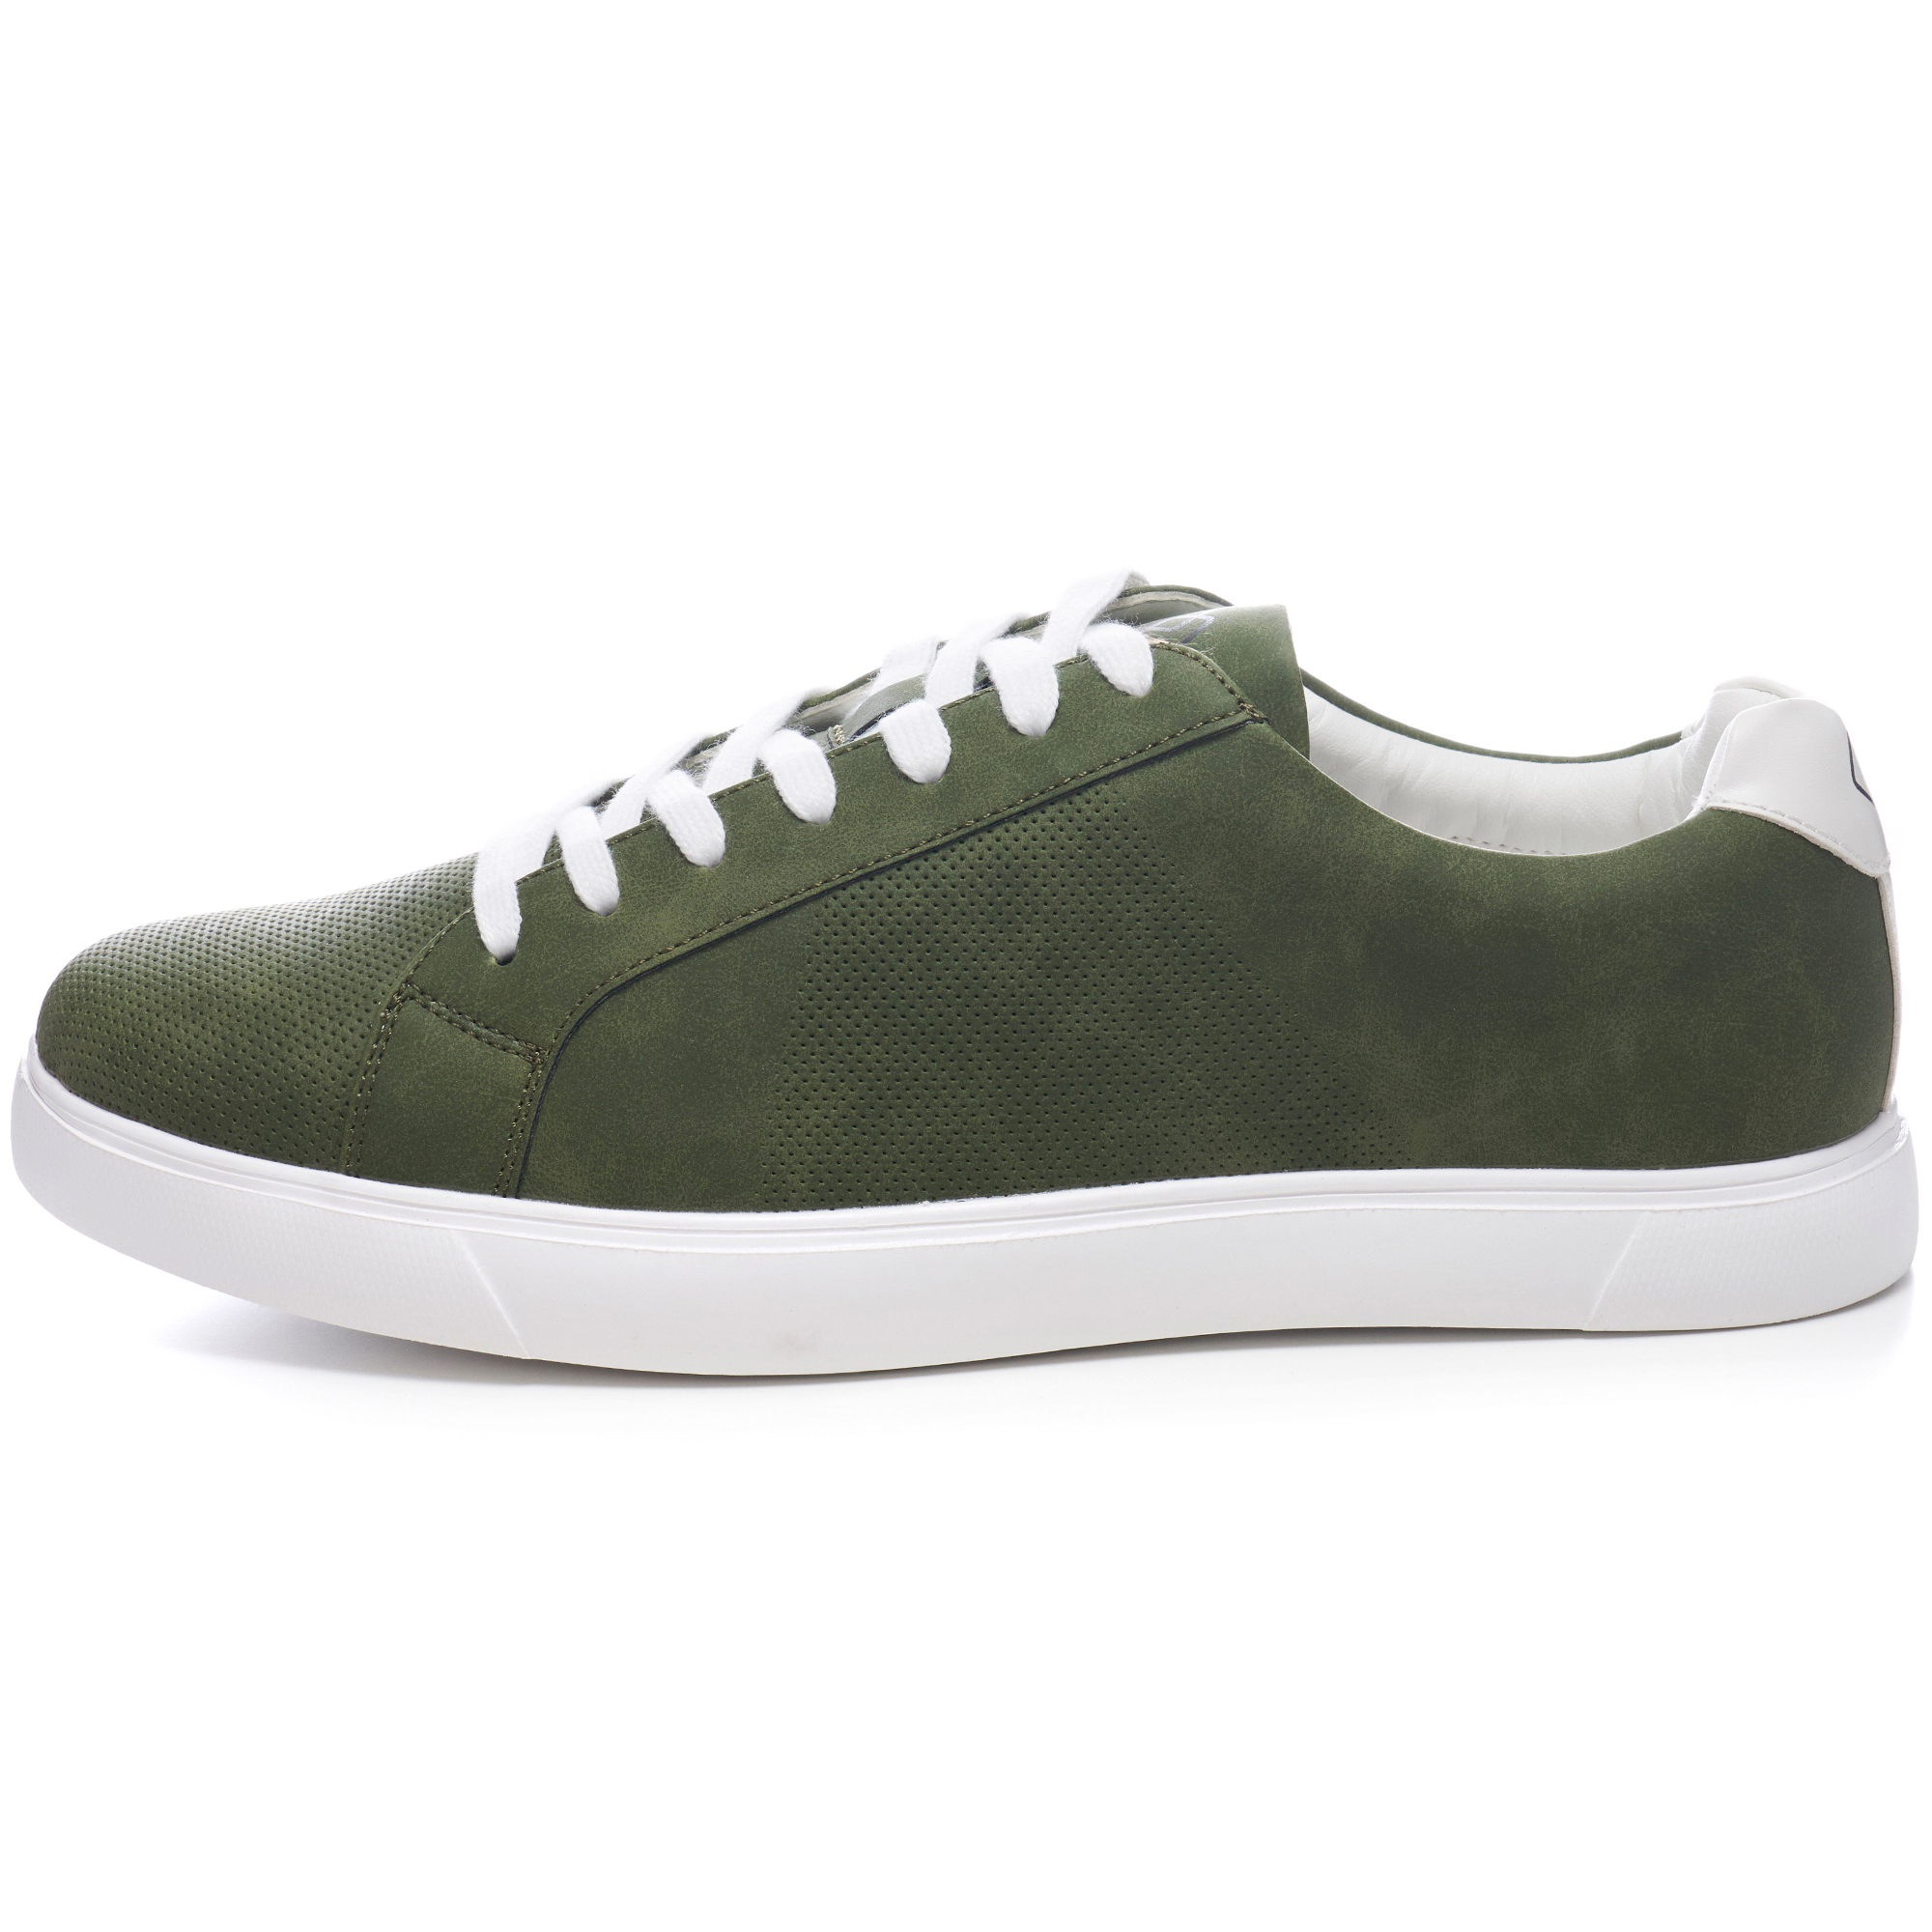 Alpine Swiss Ben Mens Smart Casual Shoes Low Top Sneakers Lace Up Tennis Shoes - image 2 of 5